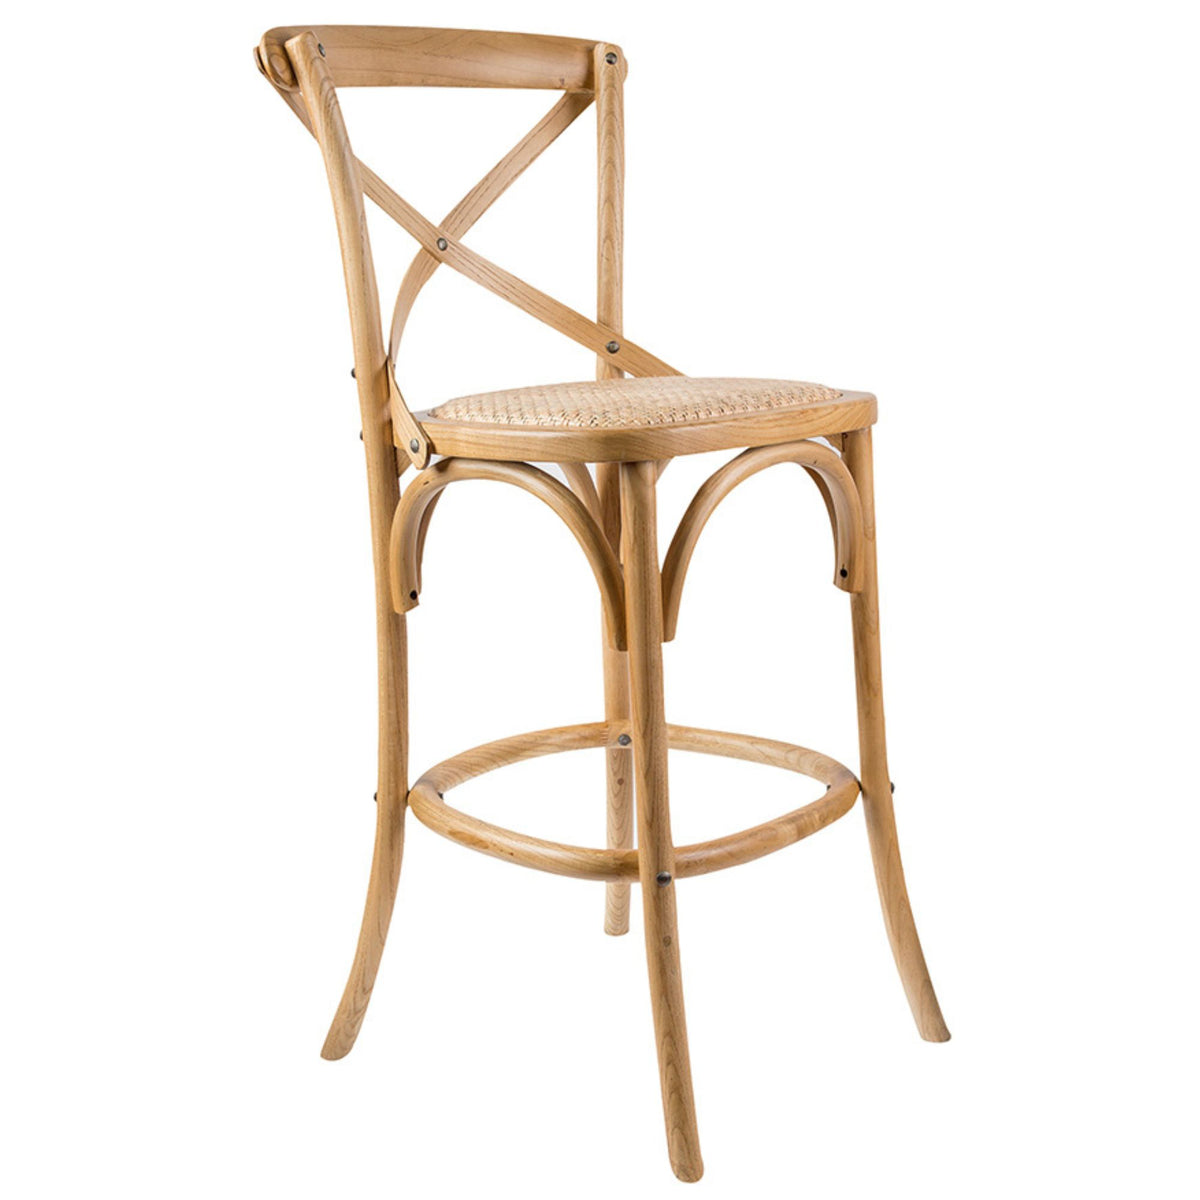 Aster Crossback Rattan Timber Dining Chair in Solid Birch - Oak